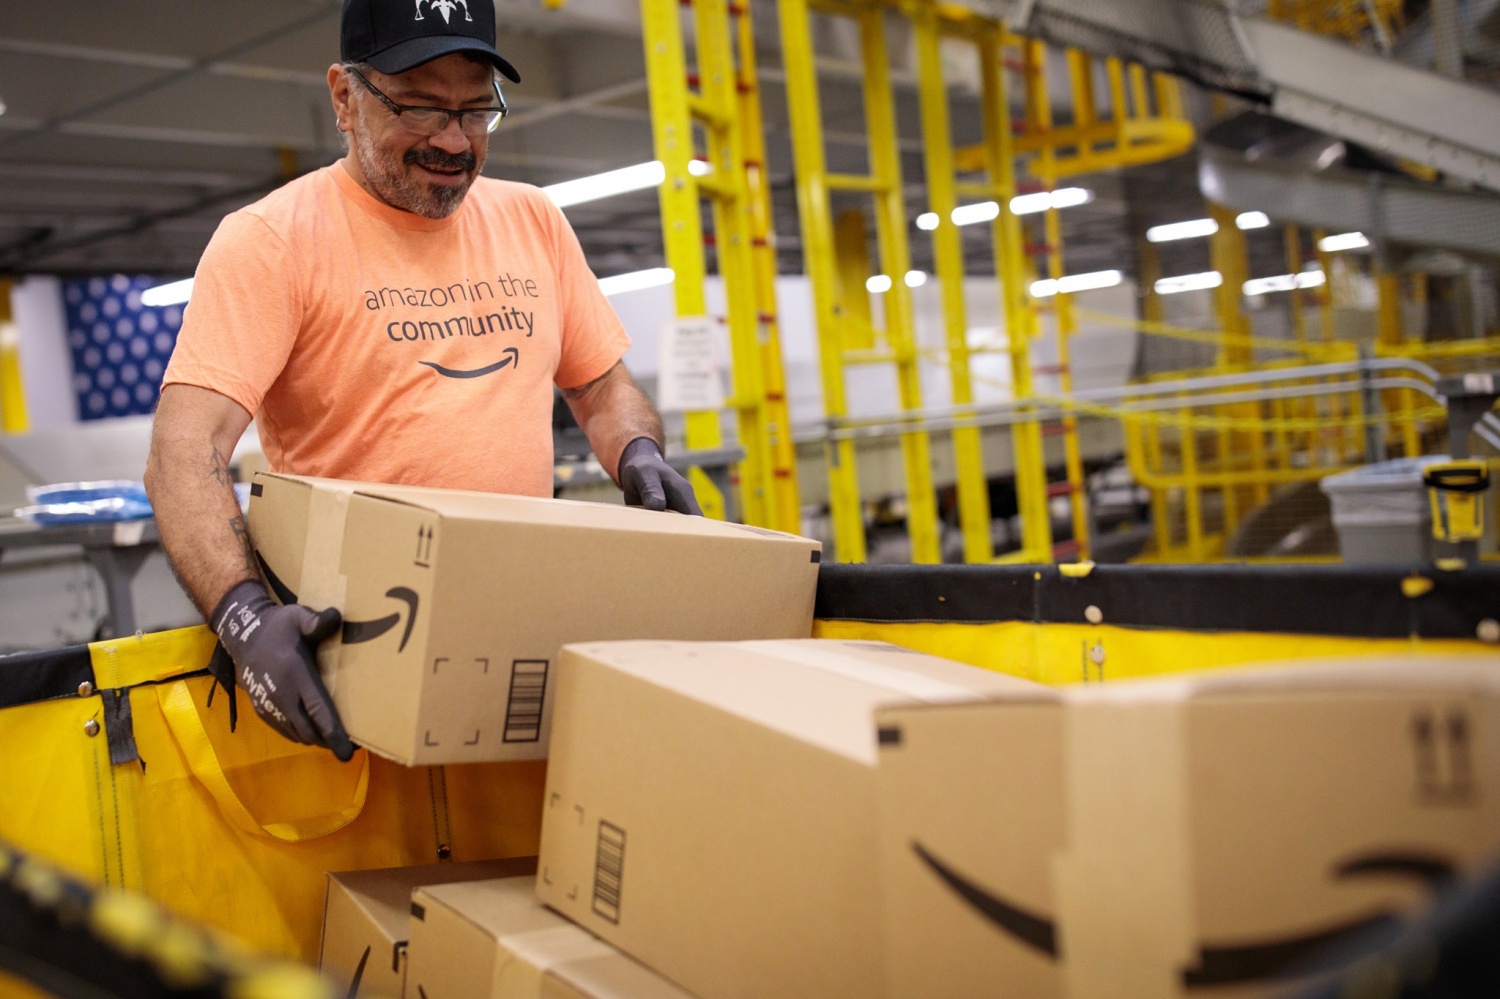 Amazon Workers Continue to Seek Better and Safer Working Conditions